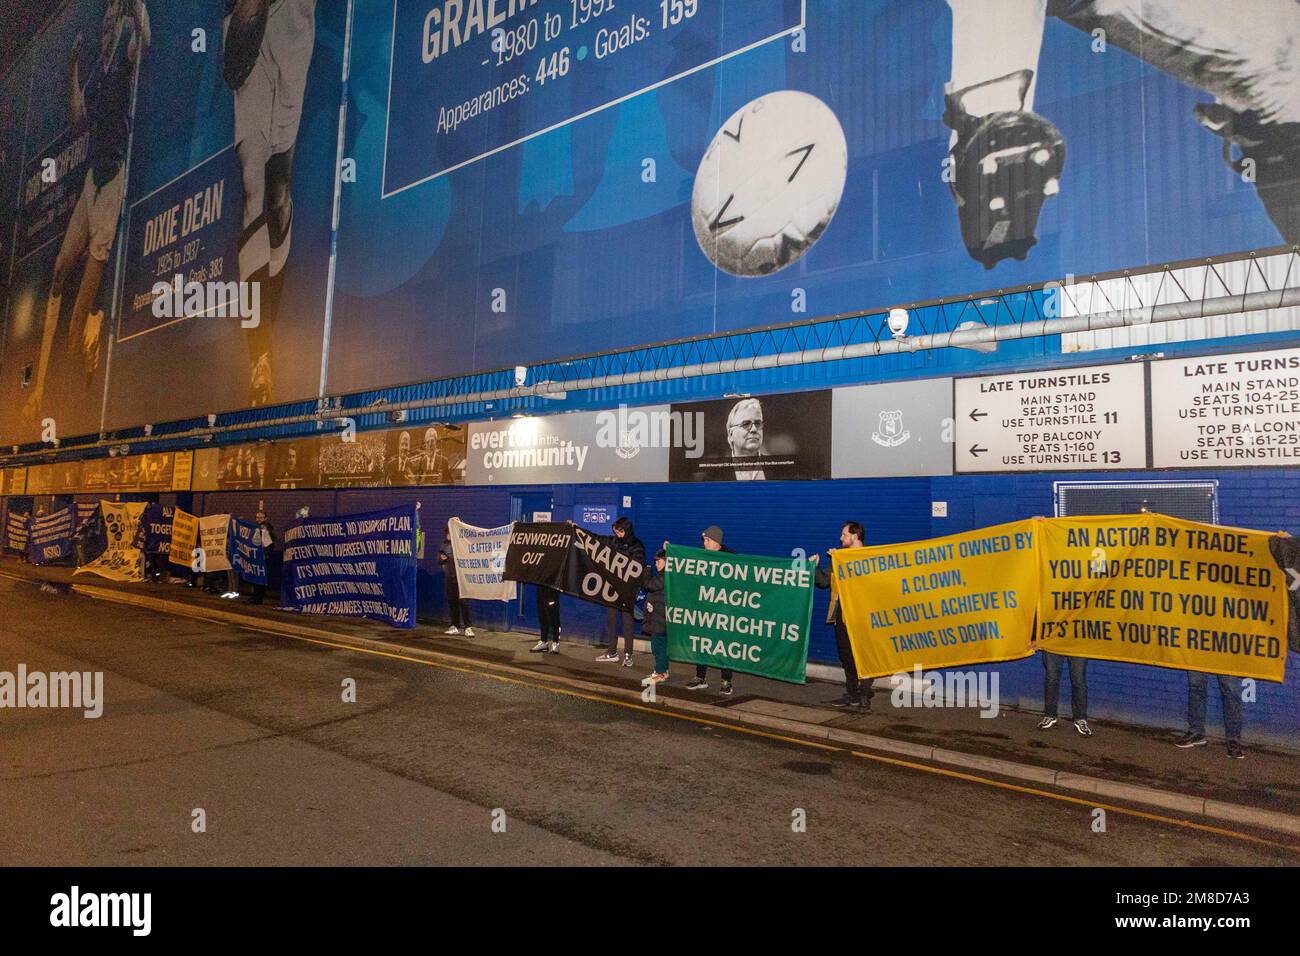 Everton fan’s show flags protesting during the Everton fan’s protest at Goodison Park, Liverpool, United Kingdom, 13th January 2023  (Photo by Phil Bryan/Alamy Live News) Stock Photo